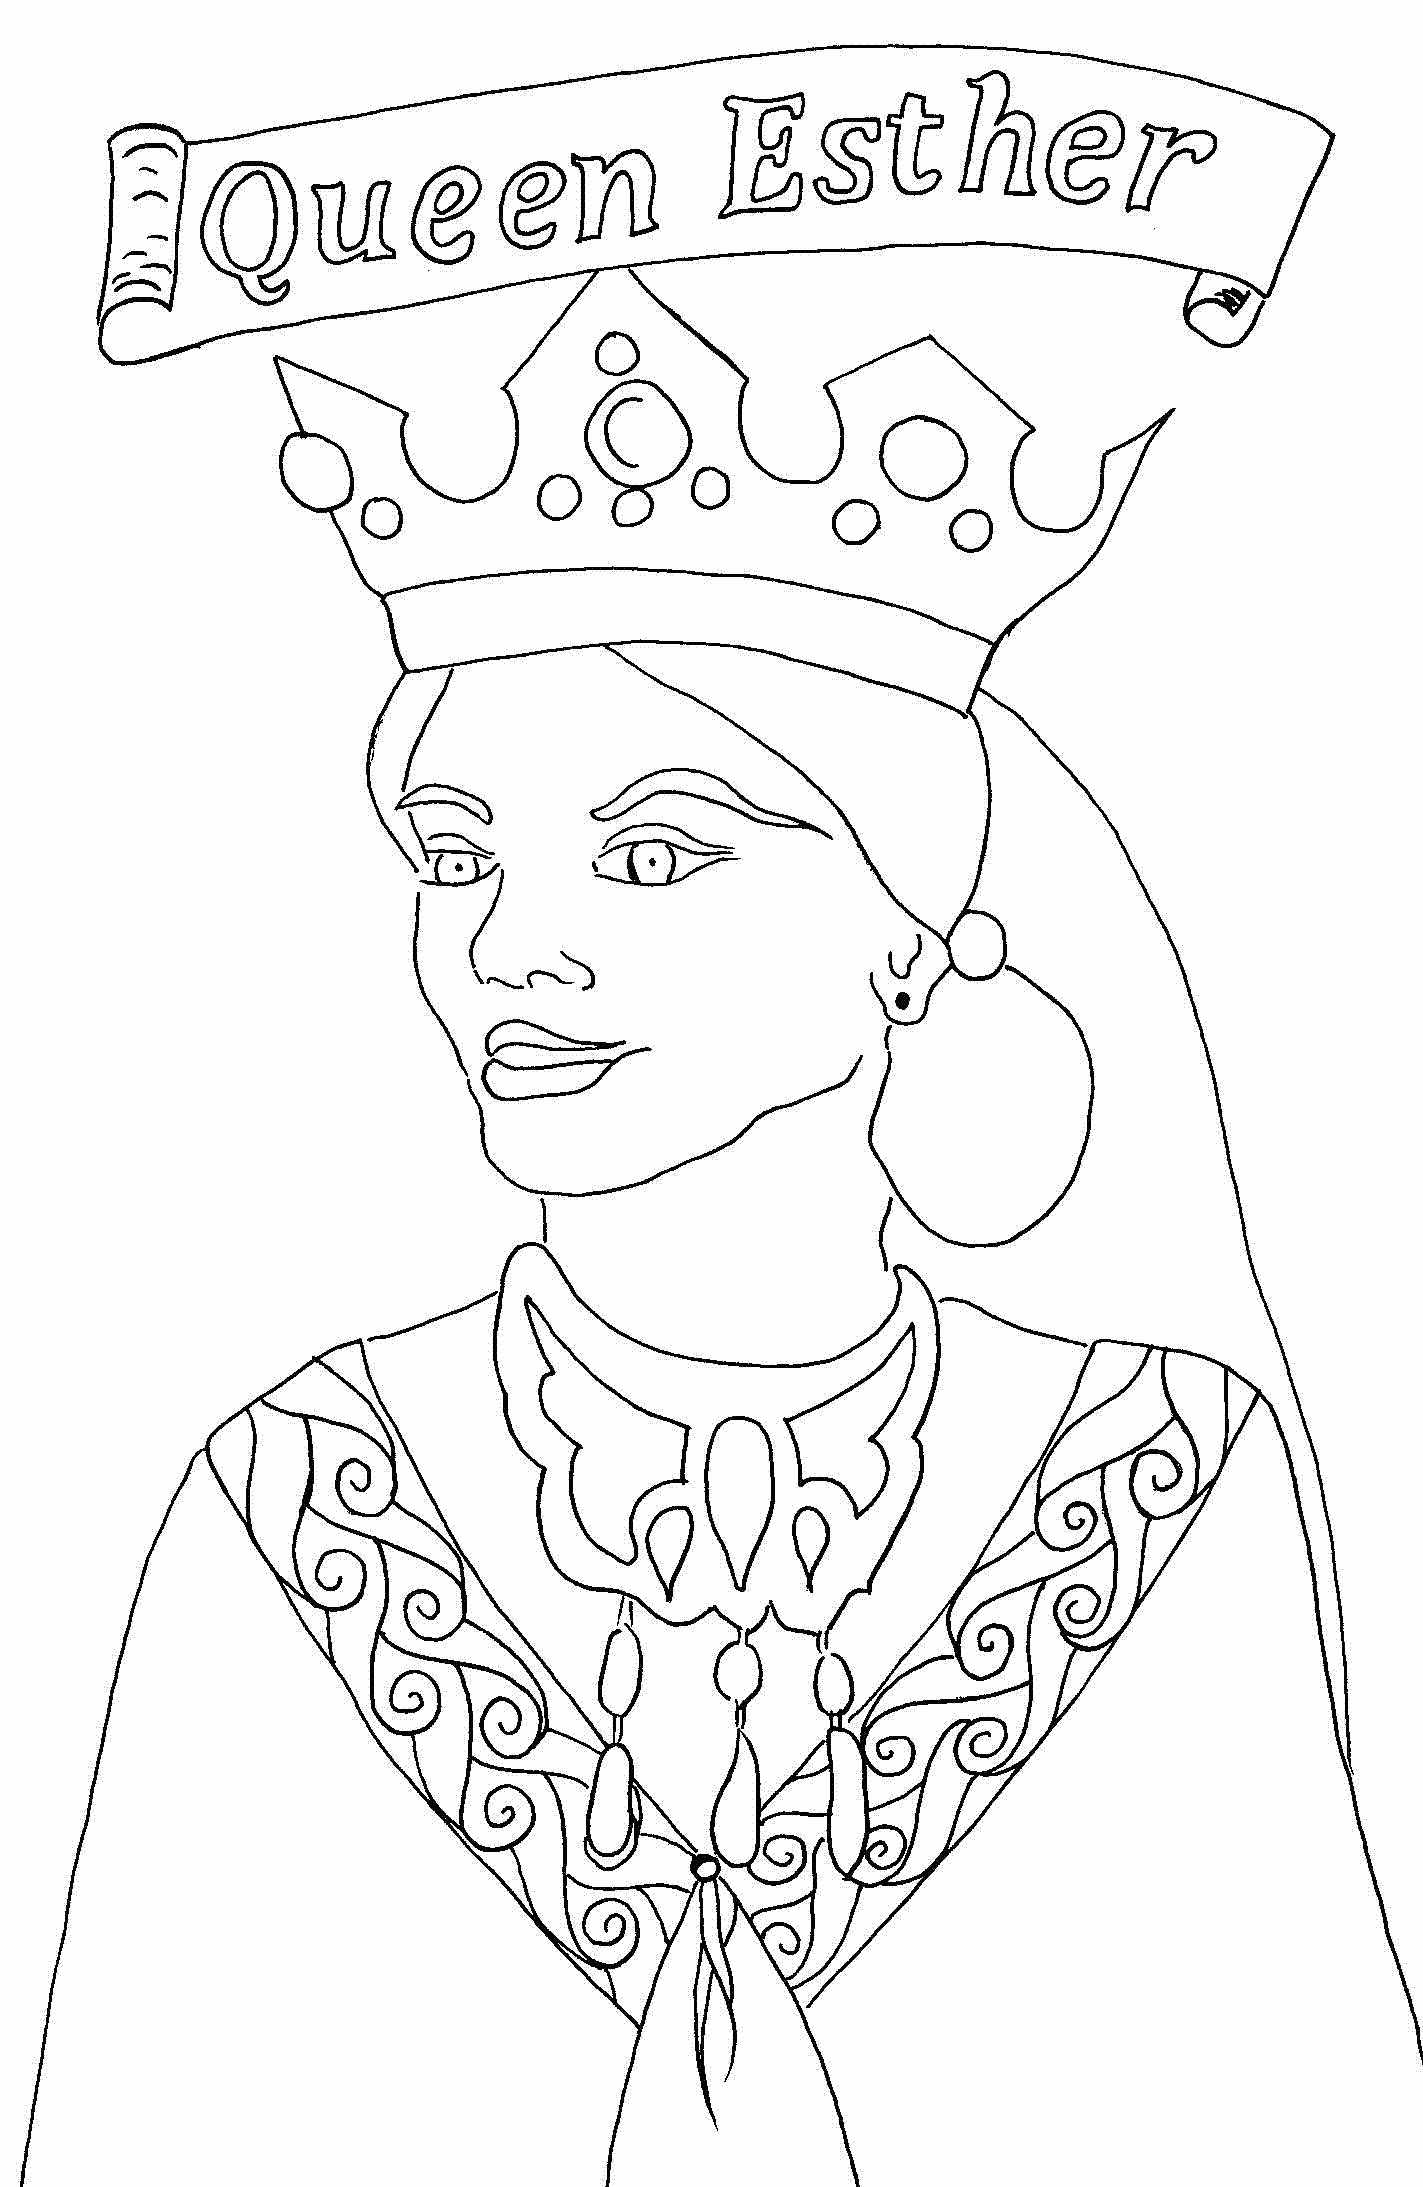 Esther Coloring Page - Free Printable Bible Coloring Page On Esther - Free Printable Bible Characters Coloring Pages